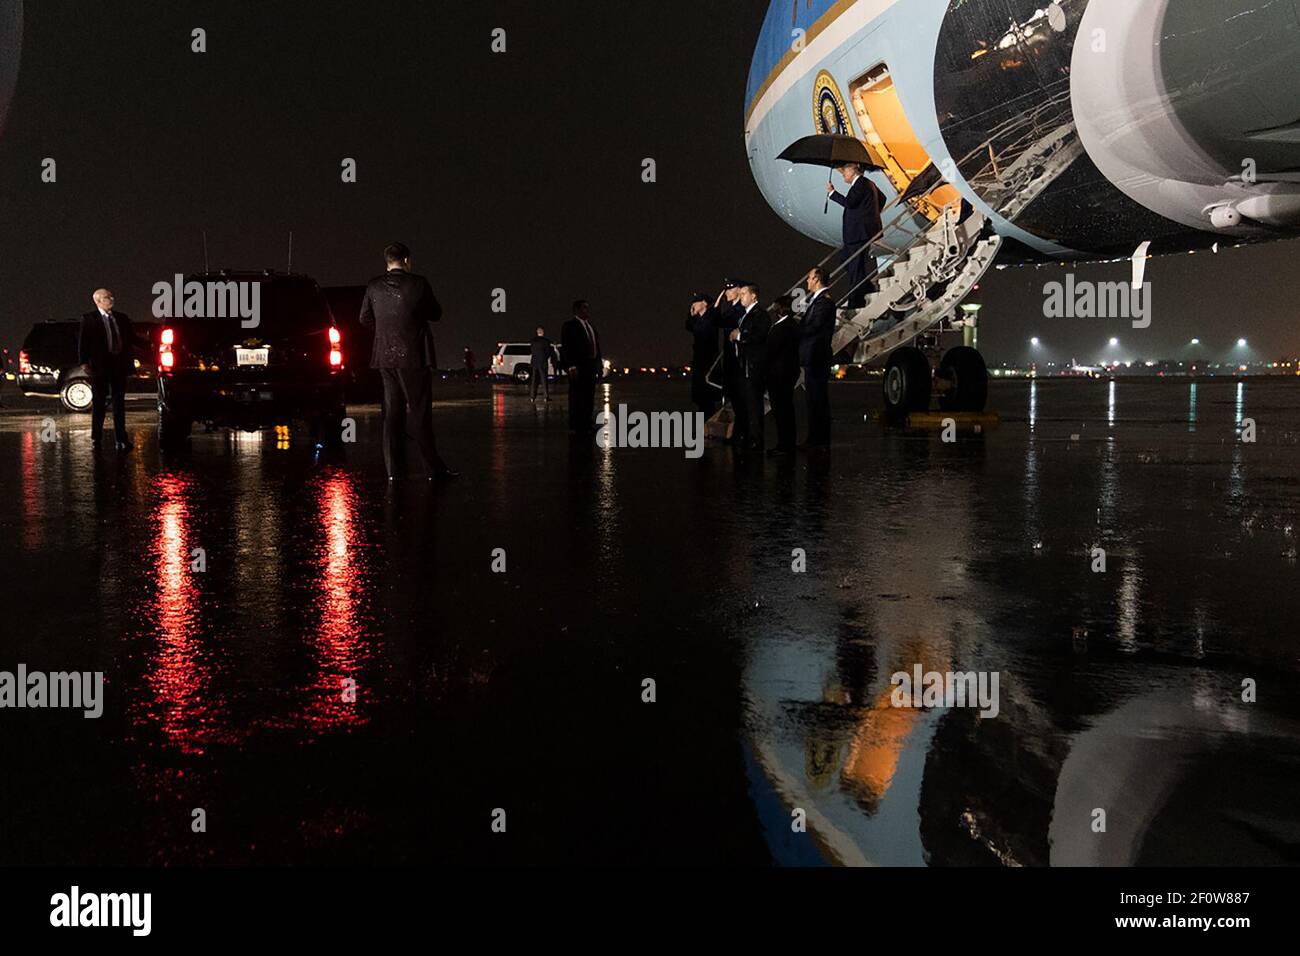 President Donald Trump carries an umbrella as disembark Air Force One during a rain storm upon his arrival to Palm Beach International Airport in West Palm Beach Fla. Friday Jan. 31 2020 and departs en route to Mar-a-Lago. Stock Photo